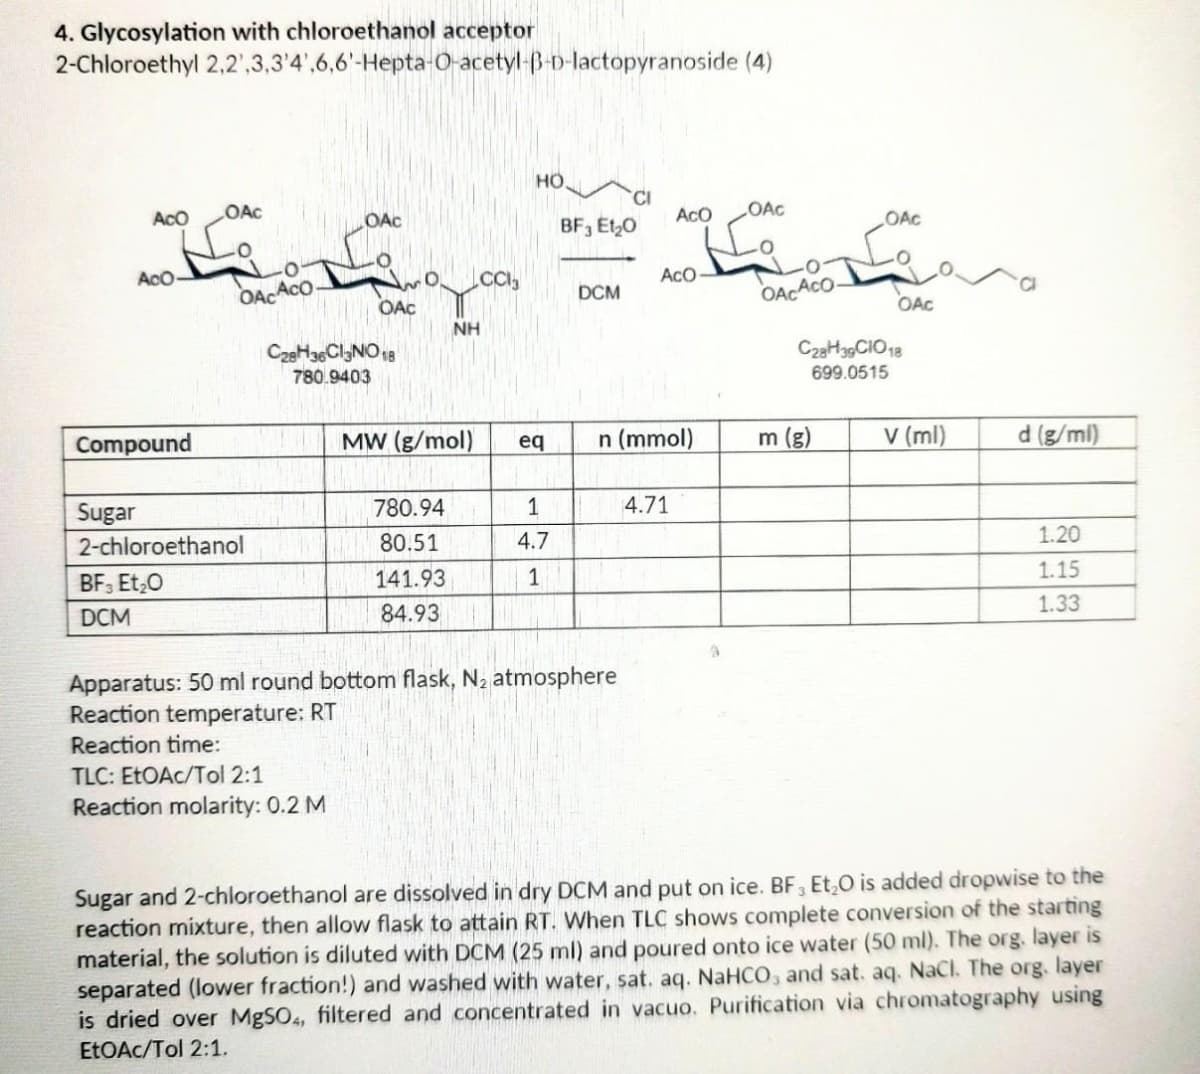 4. Glycosylation with chloroethanol acceptor
2-Chloroethyl
ACO
مایا
2,2,3,3'4',6,6'-Hepta-O-acetyl-B-D-lactopyranoside (4)
HO
CI
ACO
OAC
AcO-
OAC
OAC
OACACO
OAC
CC13
ACO
NH
Compound
MW (g/mol)
eq
n (mmol)
d (g/ml)
780.94
1
4.71
Sugar
2-chloroethanol
80.51
4.7
1.20
BF3 Et₂O
141.93
1
1.15
1.33
DCM
84.93
Apparatus: 50 ml round bottom flask, N₂ atmosphere
Reaction temperature: RT
Reaction time:
TLC: EtOAc/Tol 2:1
Reaction molarity: 0.2 M
Sugar and 2-chloroethanol are dissolved in dry DCM and put on ice. BF3 Et₂O is added dropwise to the
reaction mixture, then allow flask to attain RT. When TLC shows complete conversion of the starting
material, the solution is diluted with DCM (25 ml) and poured onto ice water (50 ml). The org. layer is
separated (lower fraction!) and washed with water, sat. aq. NaHCO3 and sat. aq. NaCl. The org. layer
is dried over MgSO4, filtered and concentrated in vacuo. Purification via chromatography using
EtOAc/Tol 2:1.
C28H36Cl3NO 18
780.9403
BF3 E1₂0
DCM
OACACO-
OAC
m (g)
OAC
C28H39 CIO 18
699.0515
v (ml)